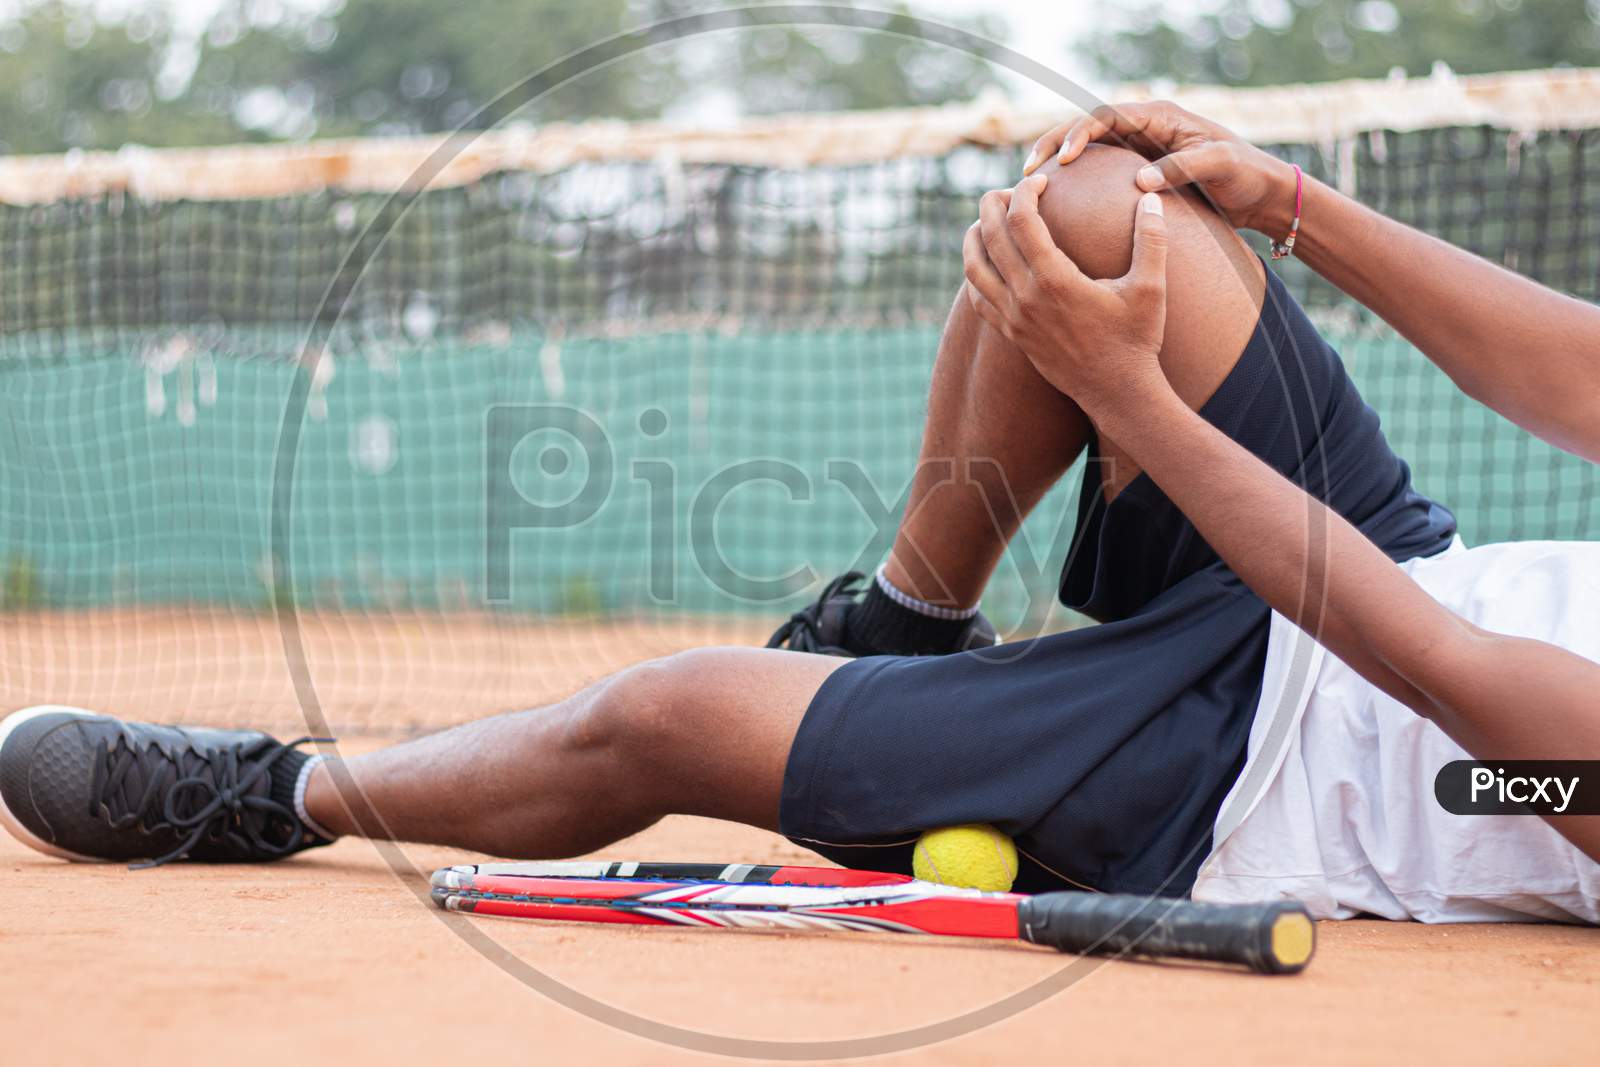 Young Indian Man Holding Knee Due To Pain in a Tennis Court